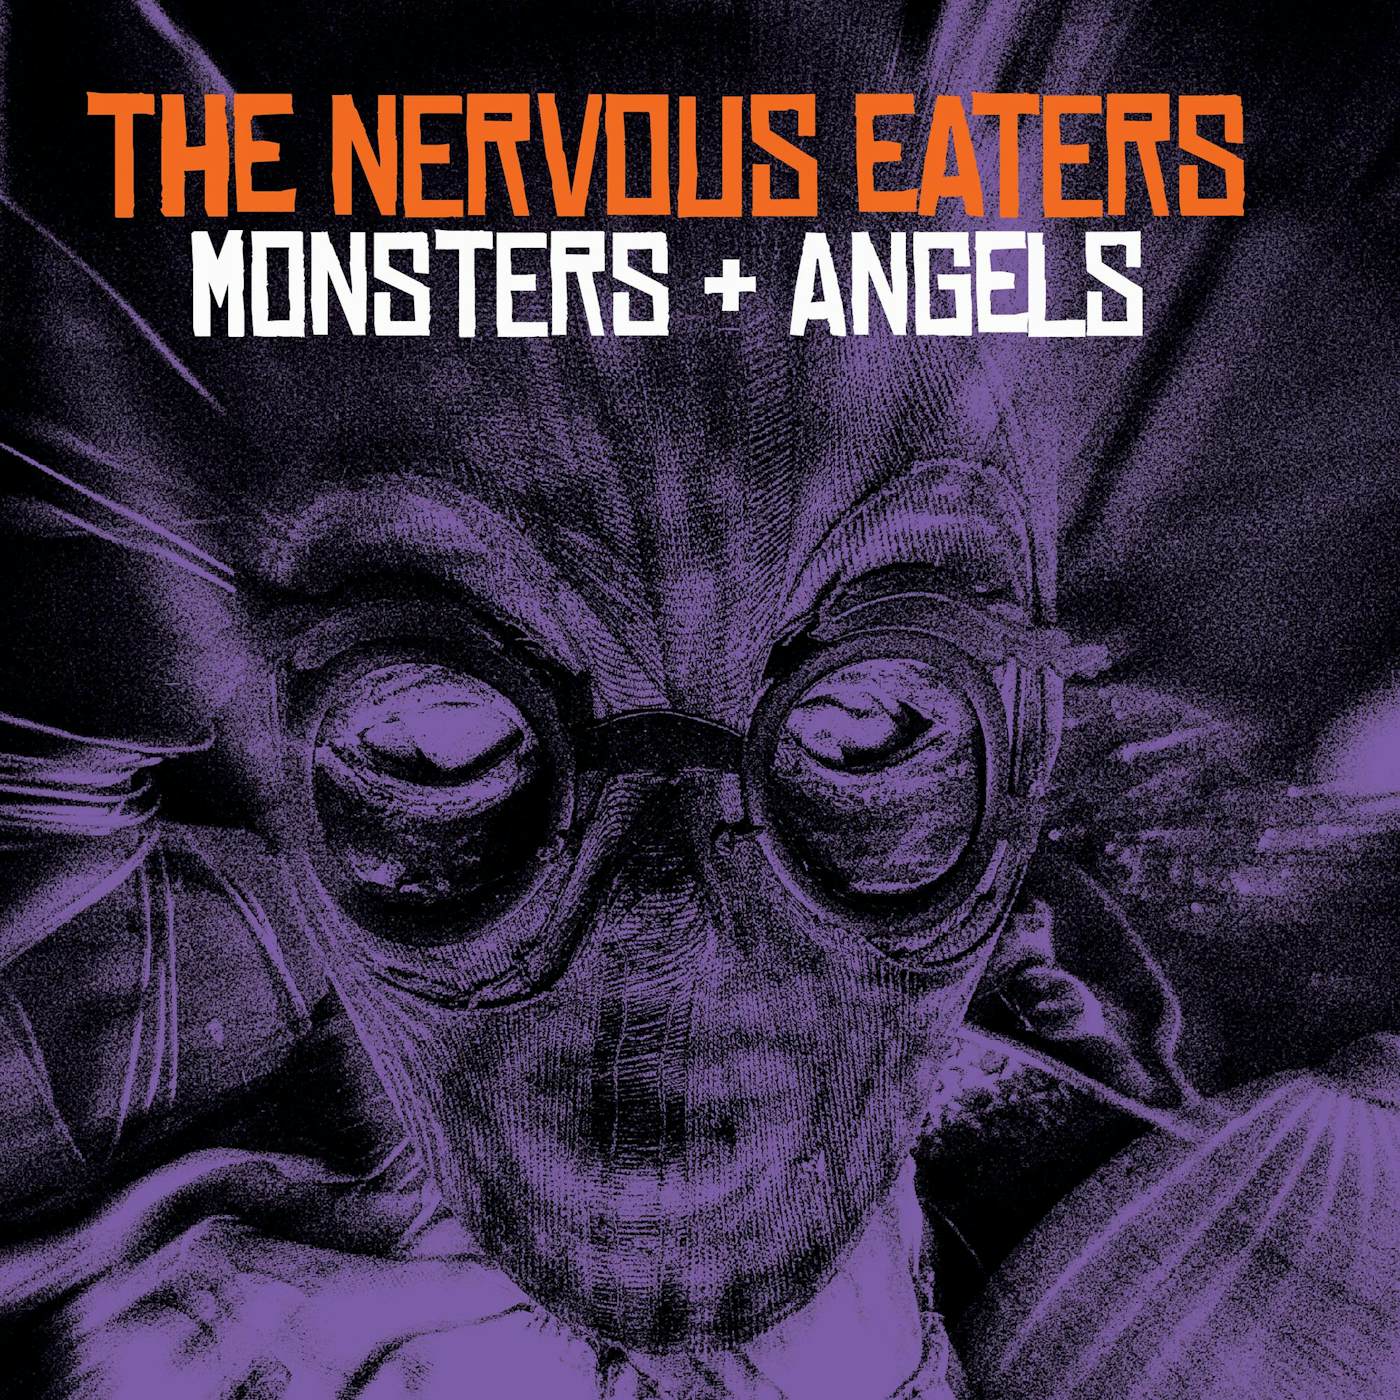 Nervous Eaters MONSTERS + ANGELS CD